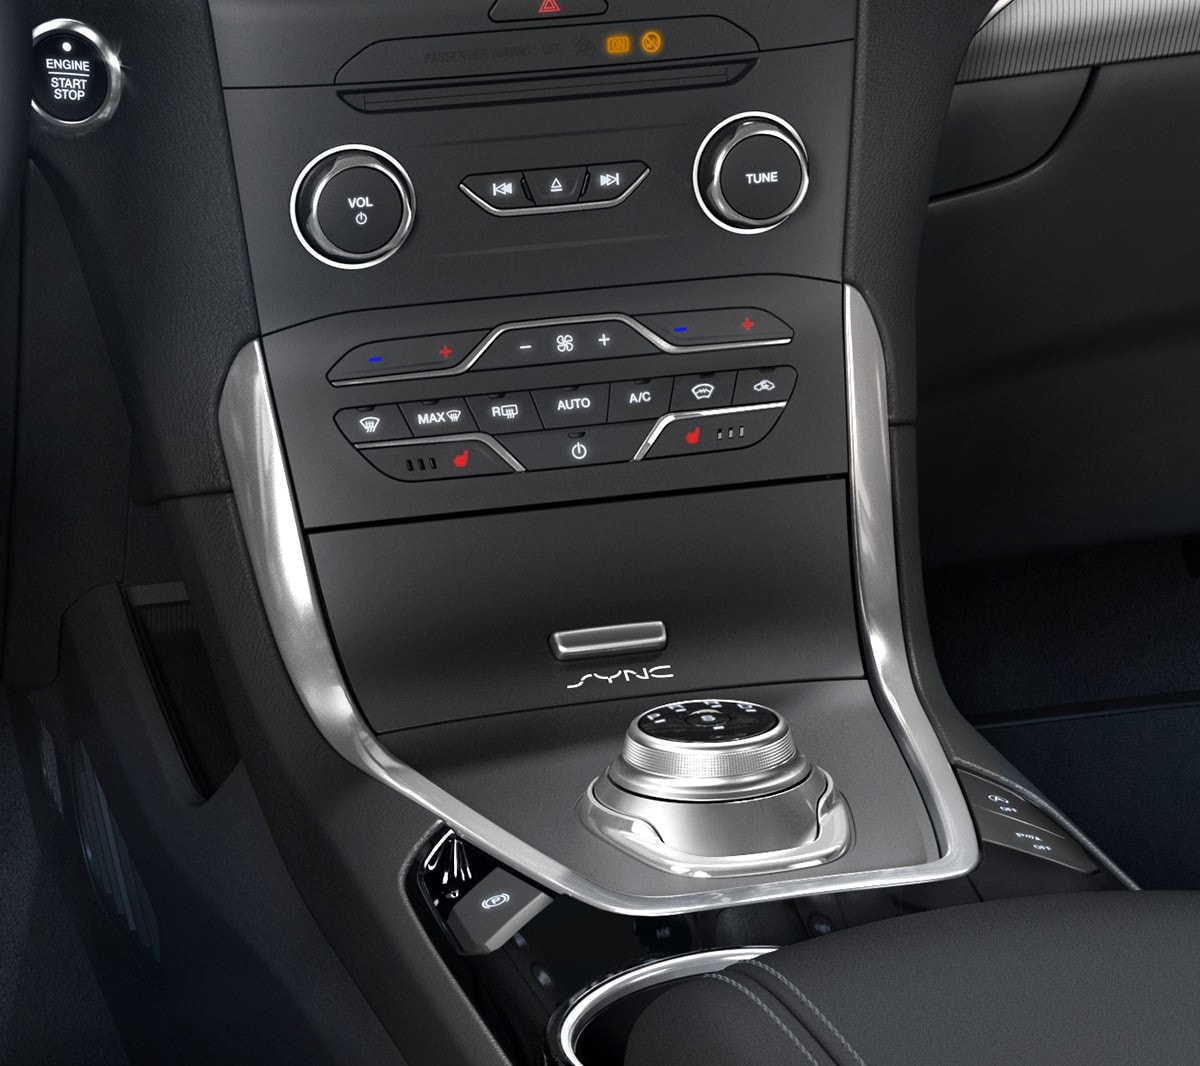 Ford S-MAX ST-Line interior 8-speed transmission